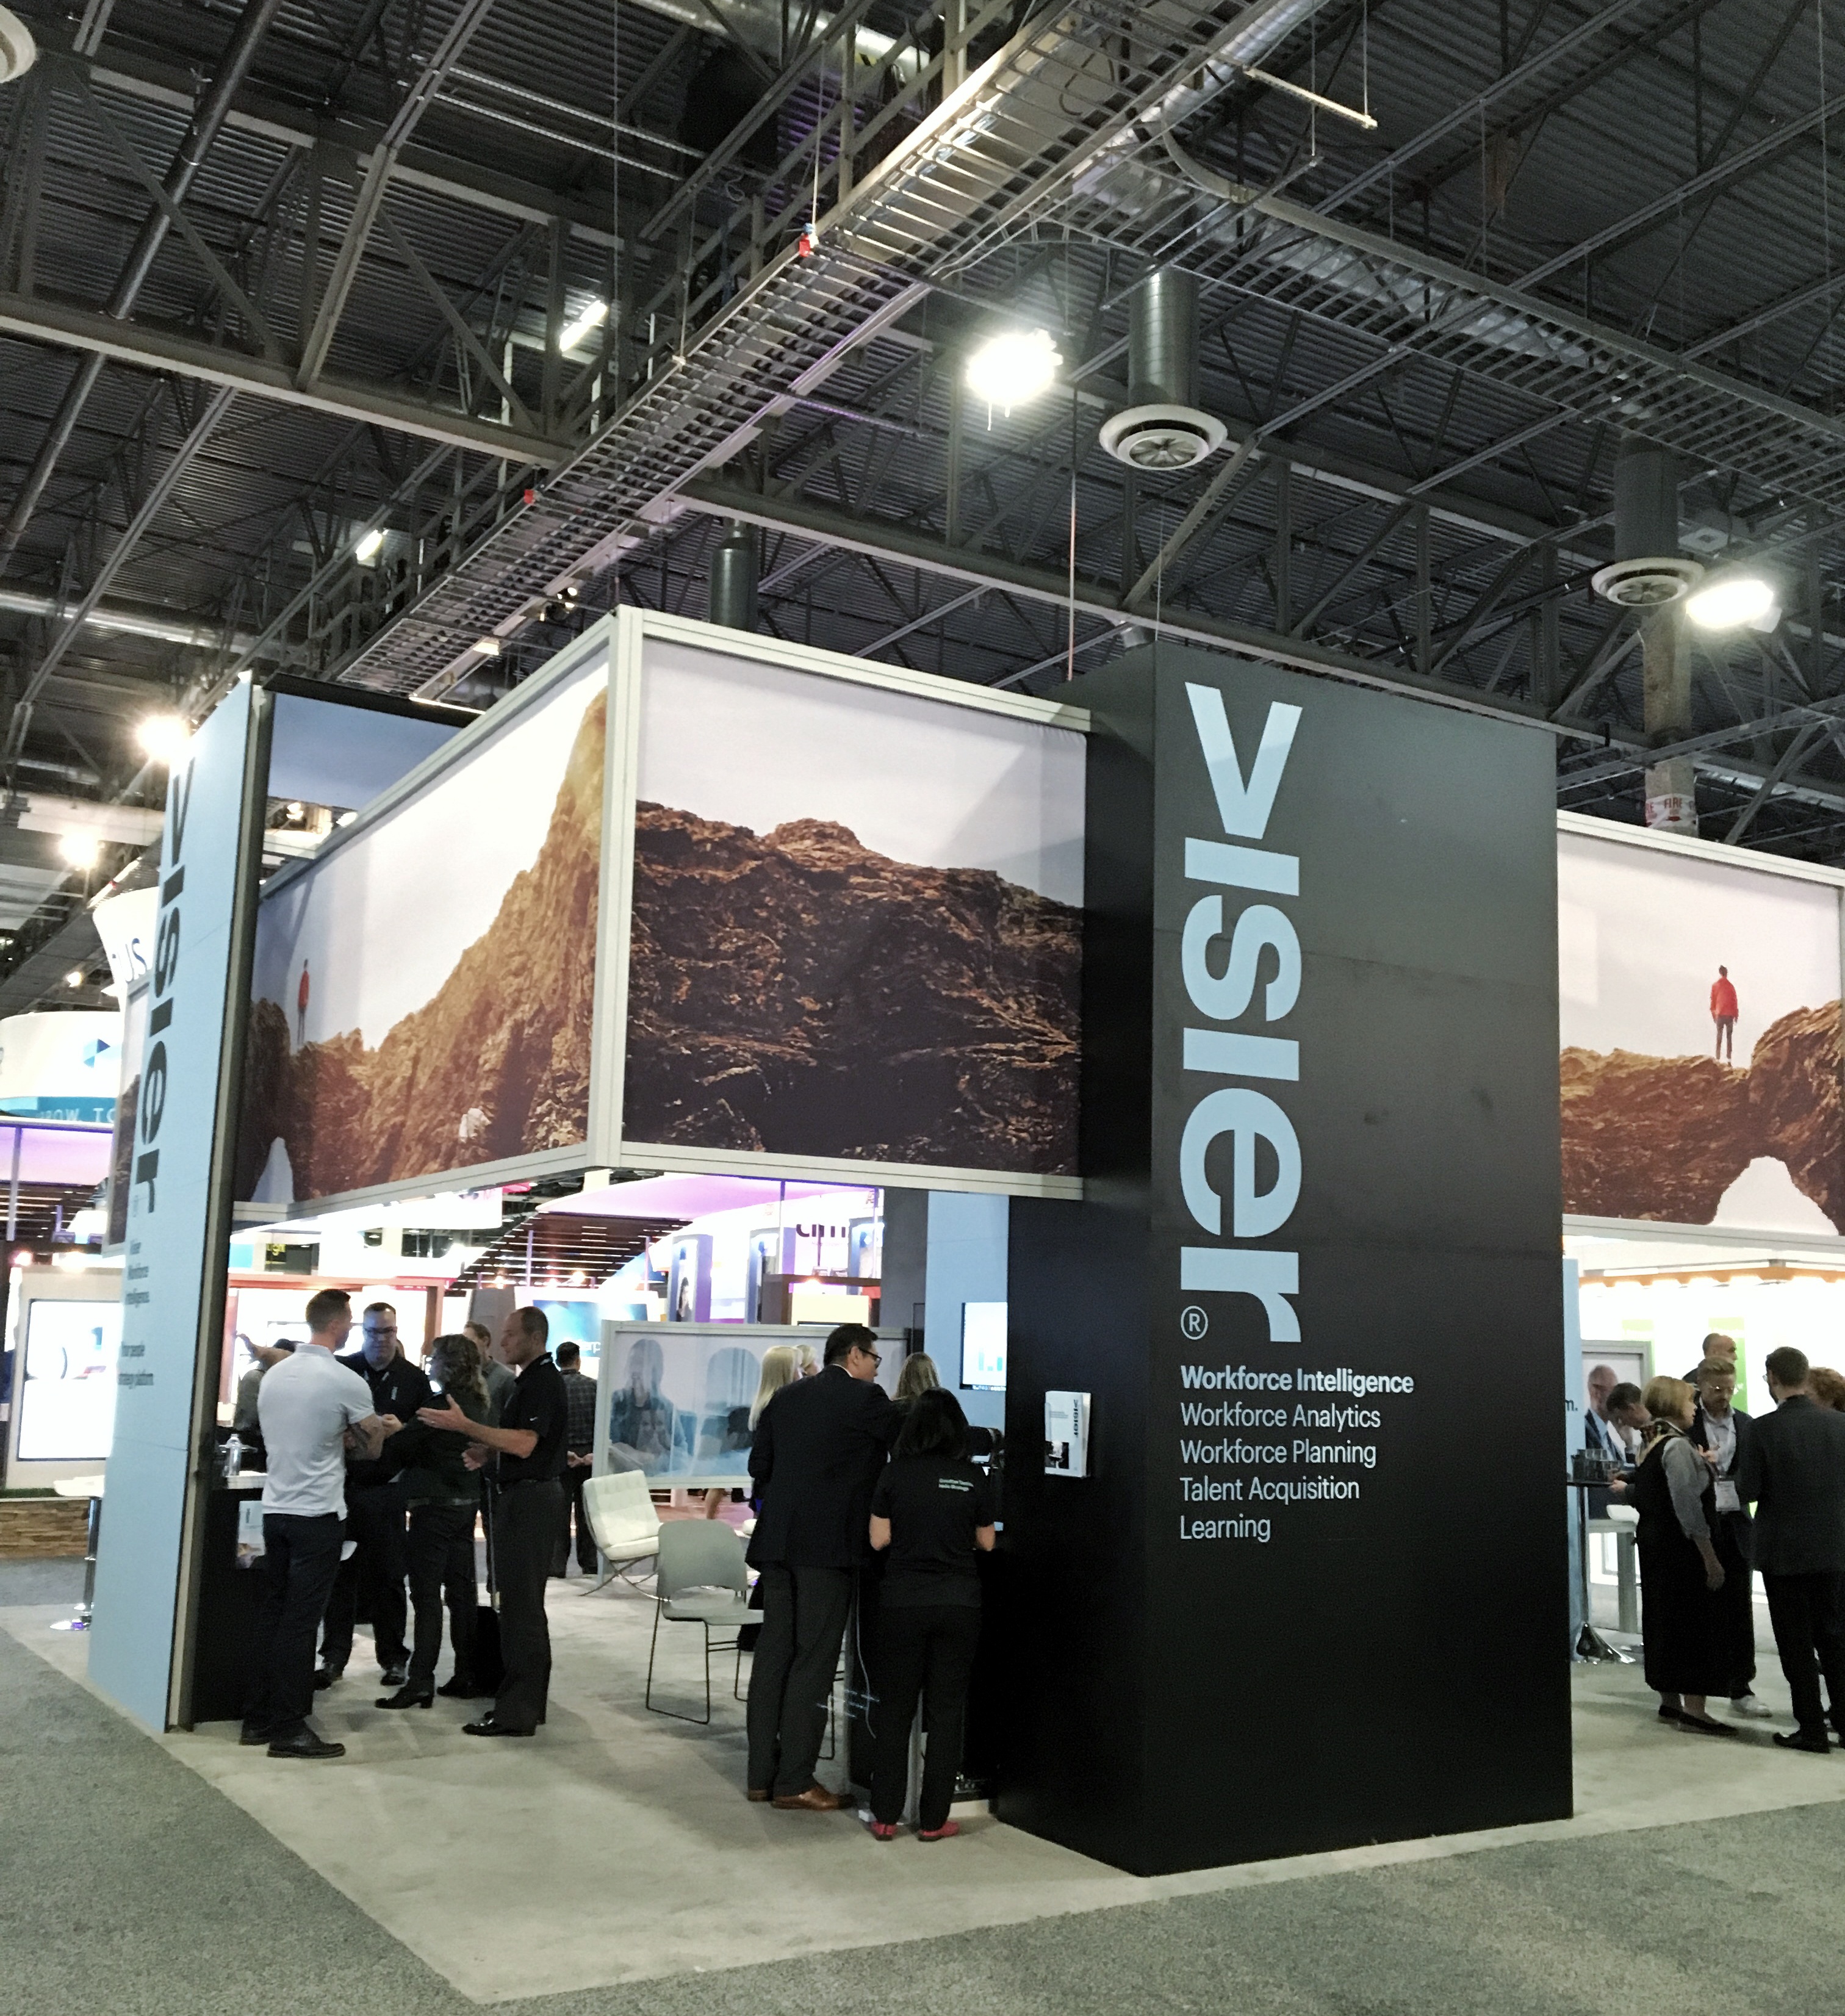 Visier booth at the HR Technology Conference 2017